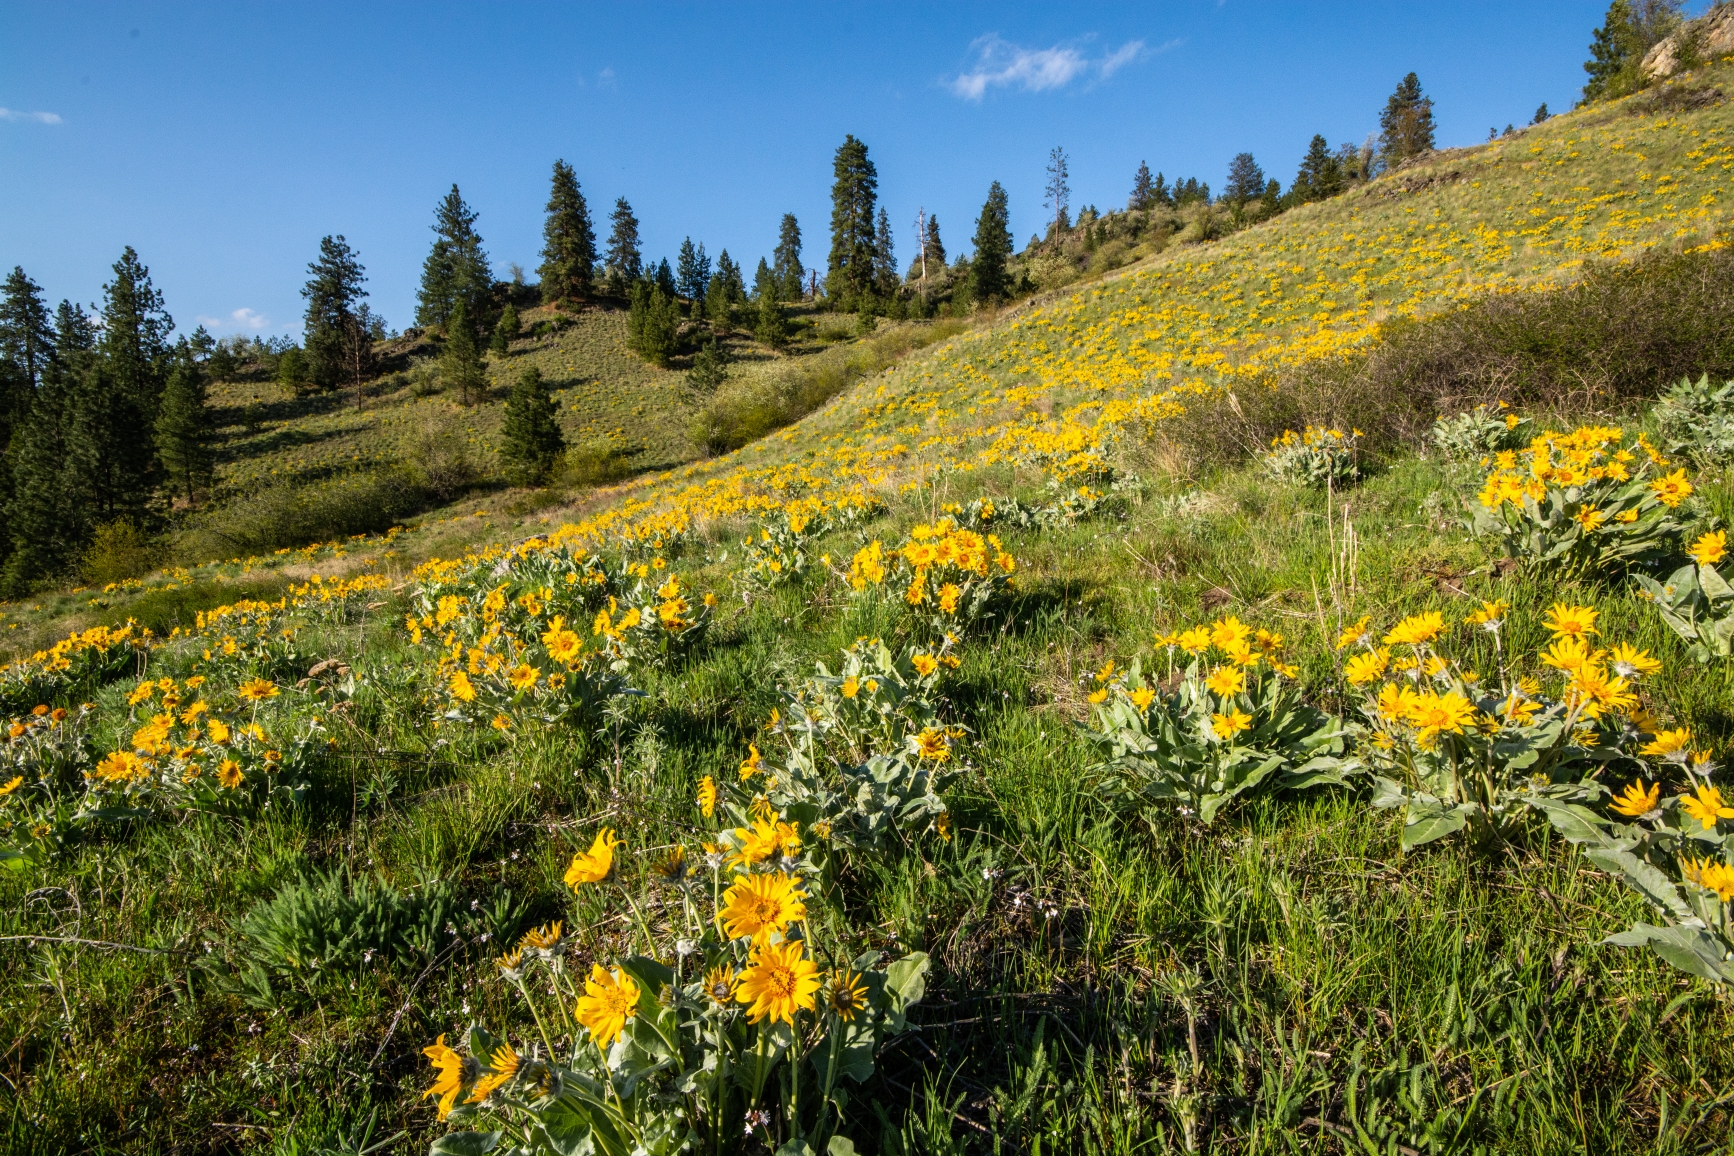  Grassland is dotted with ponderosa pine and groves of Douglas-fir. Photo credit: Destination BC